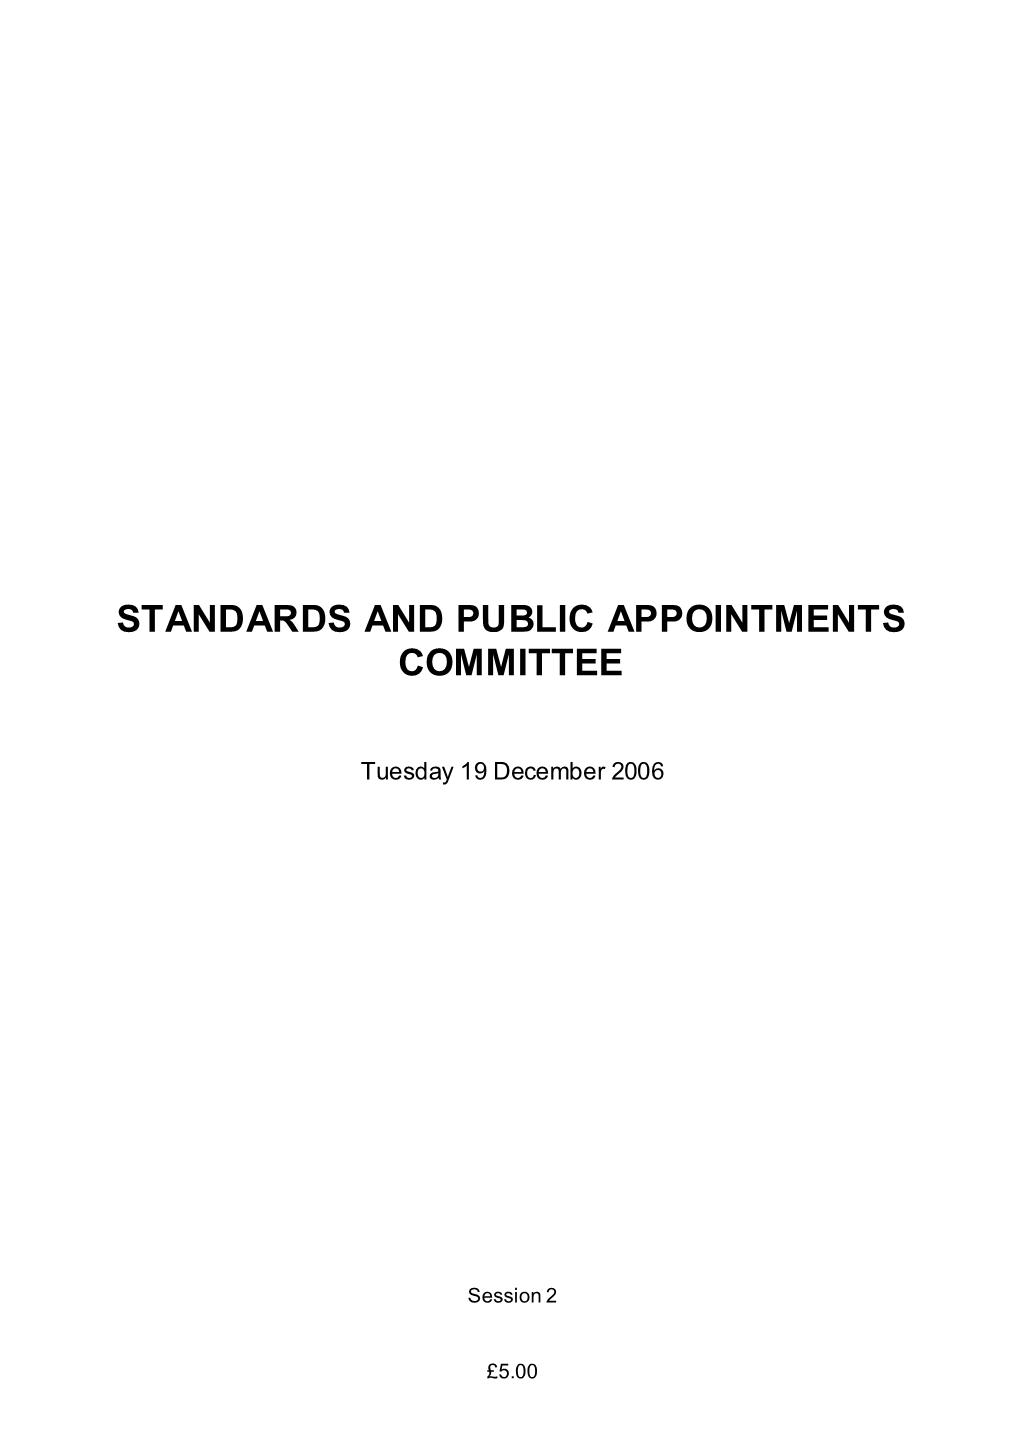 Standards and Public Appointments Committee